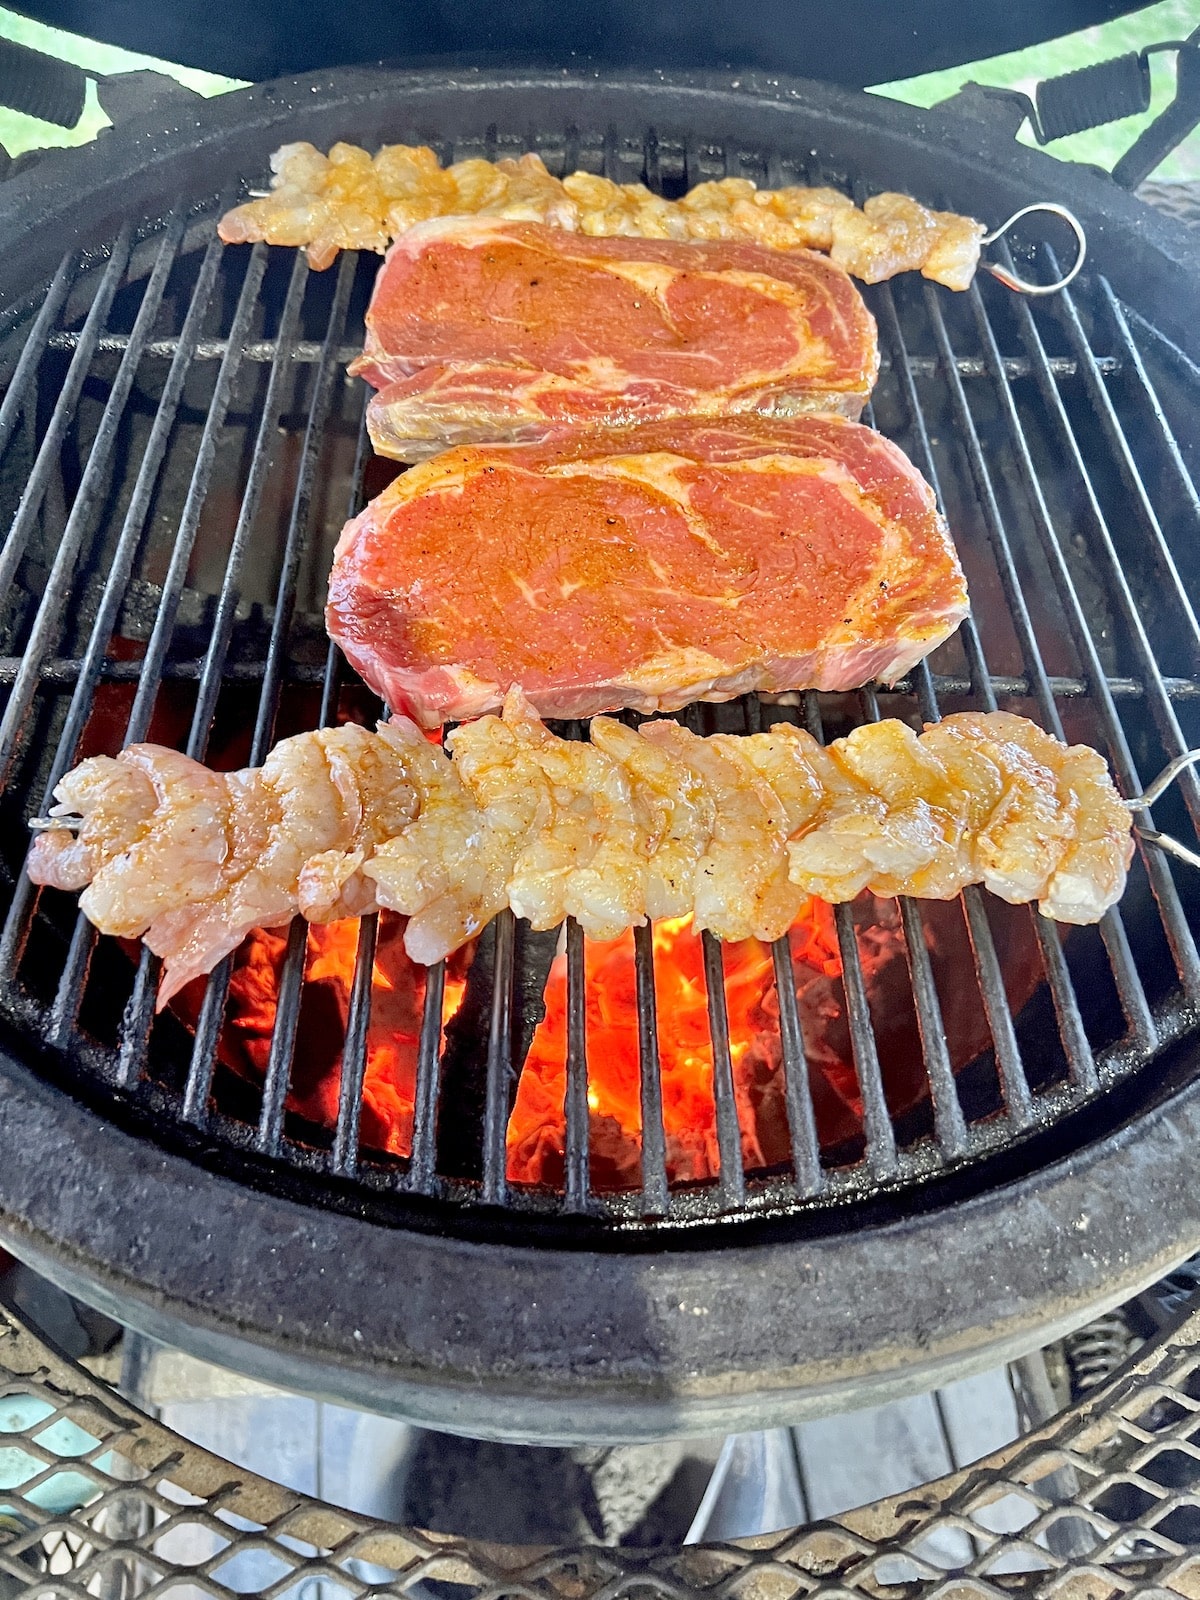 2 ribeye steaks with 2 skewers of shrimp on a grill.